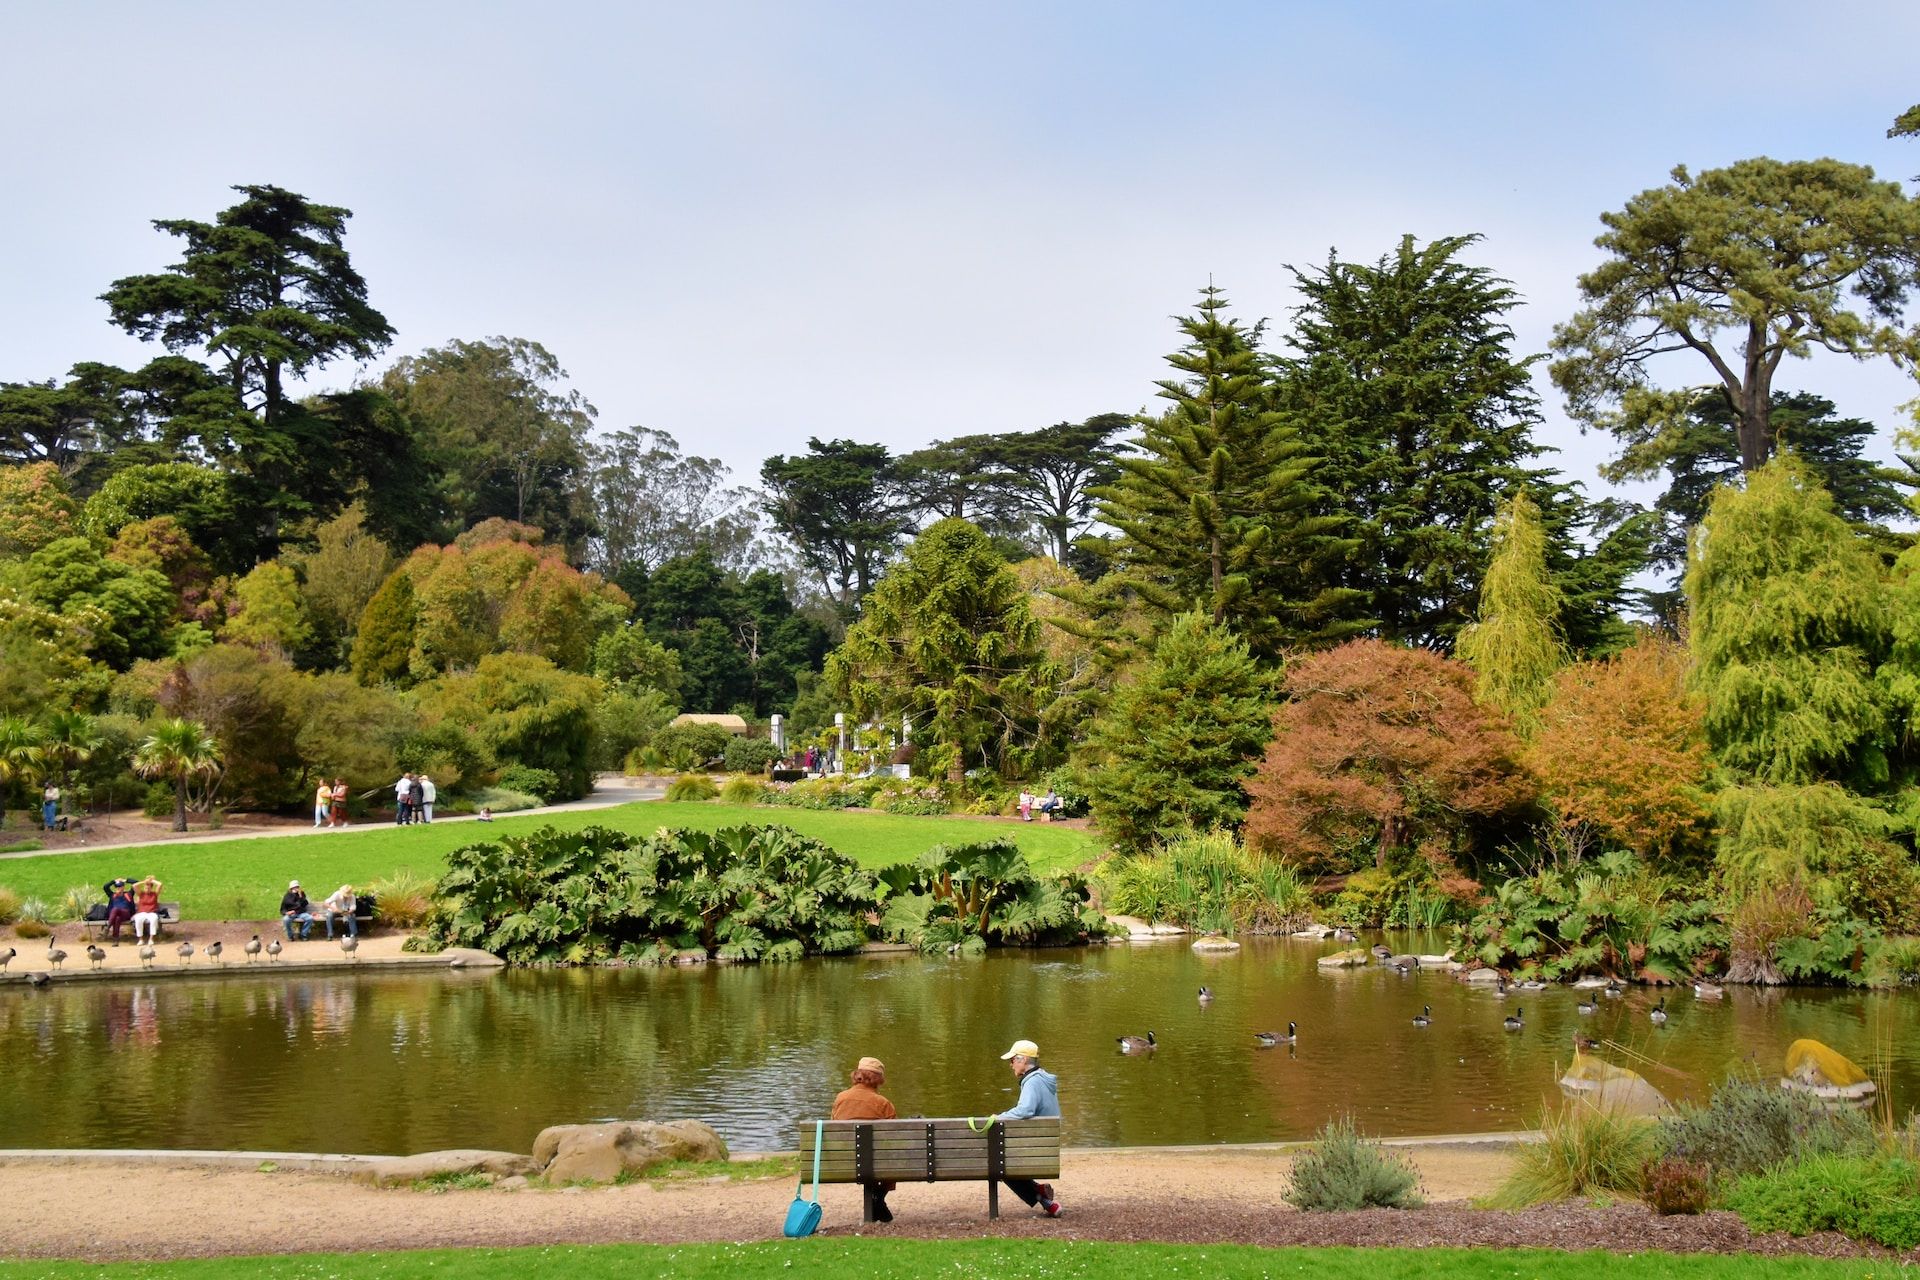 People and ducks around a pond at Golden Gate Park in San Francisco, California, USA